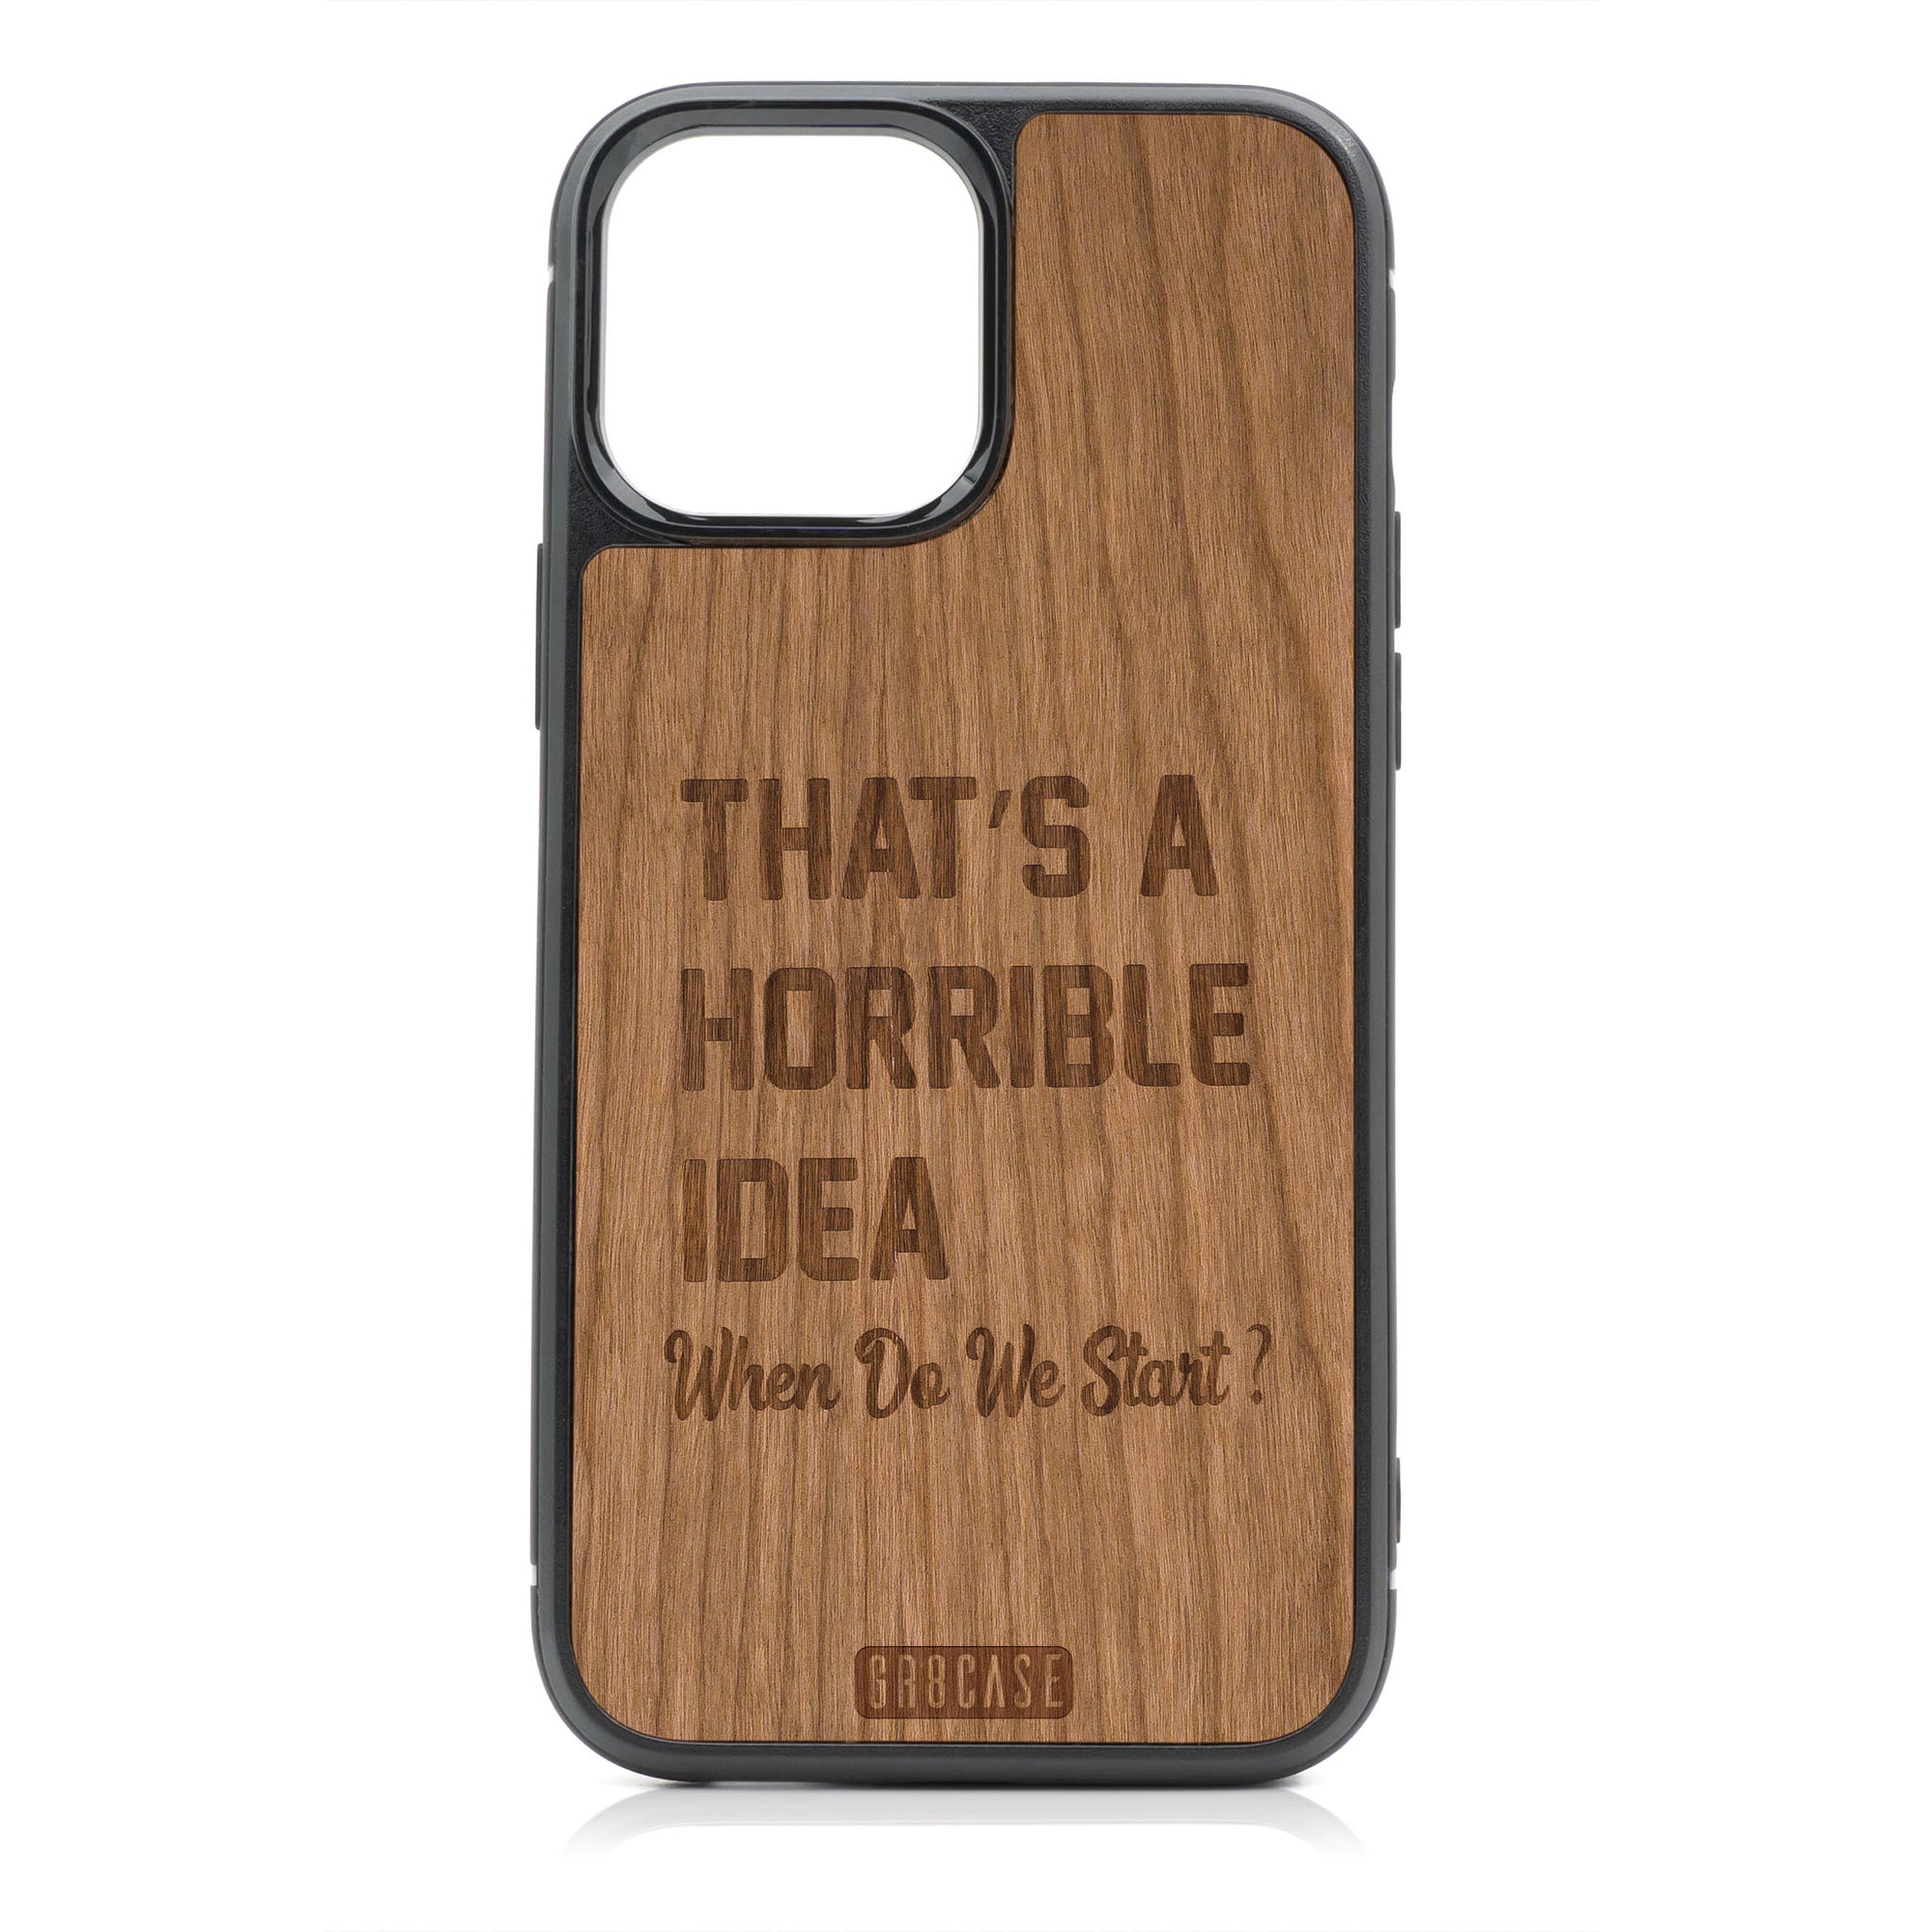 That's A Horrible Idea When Do We Start? Design Wood Case For iPhone 13 Pro Max